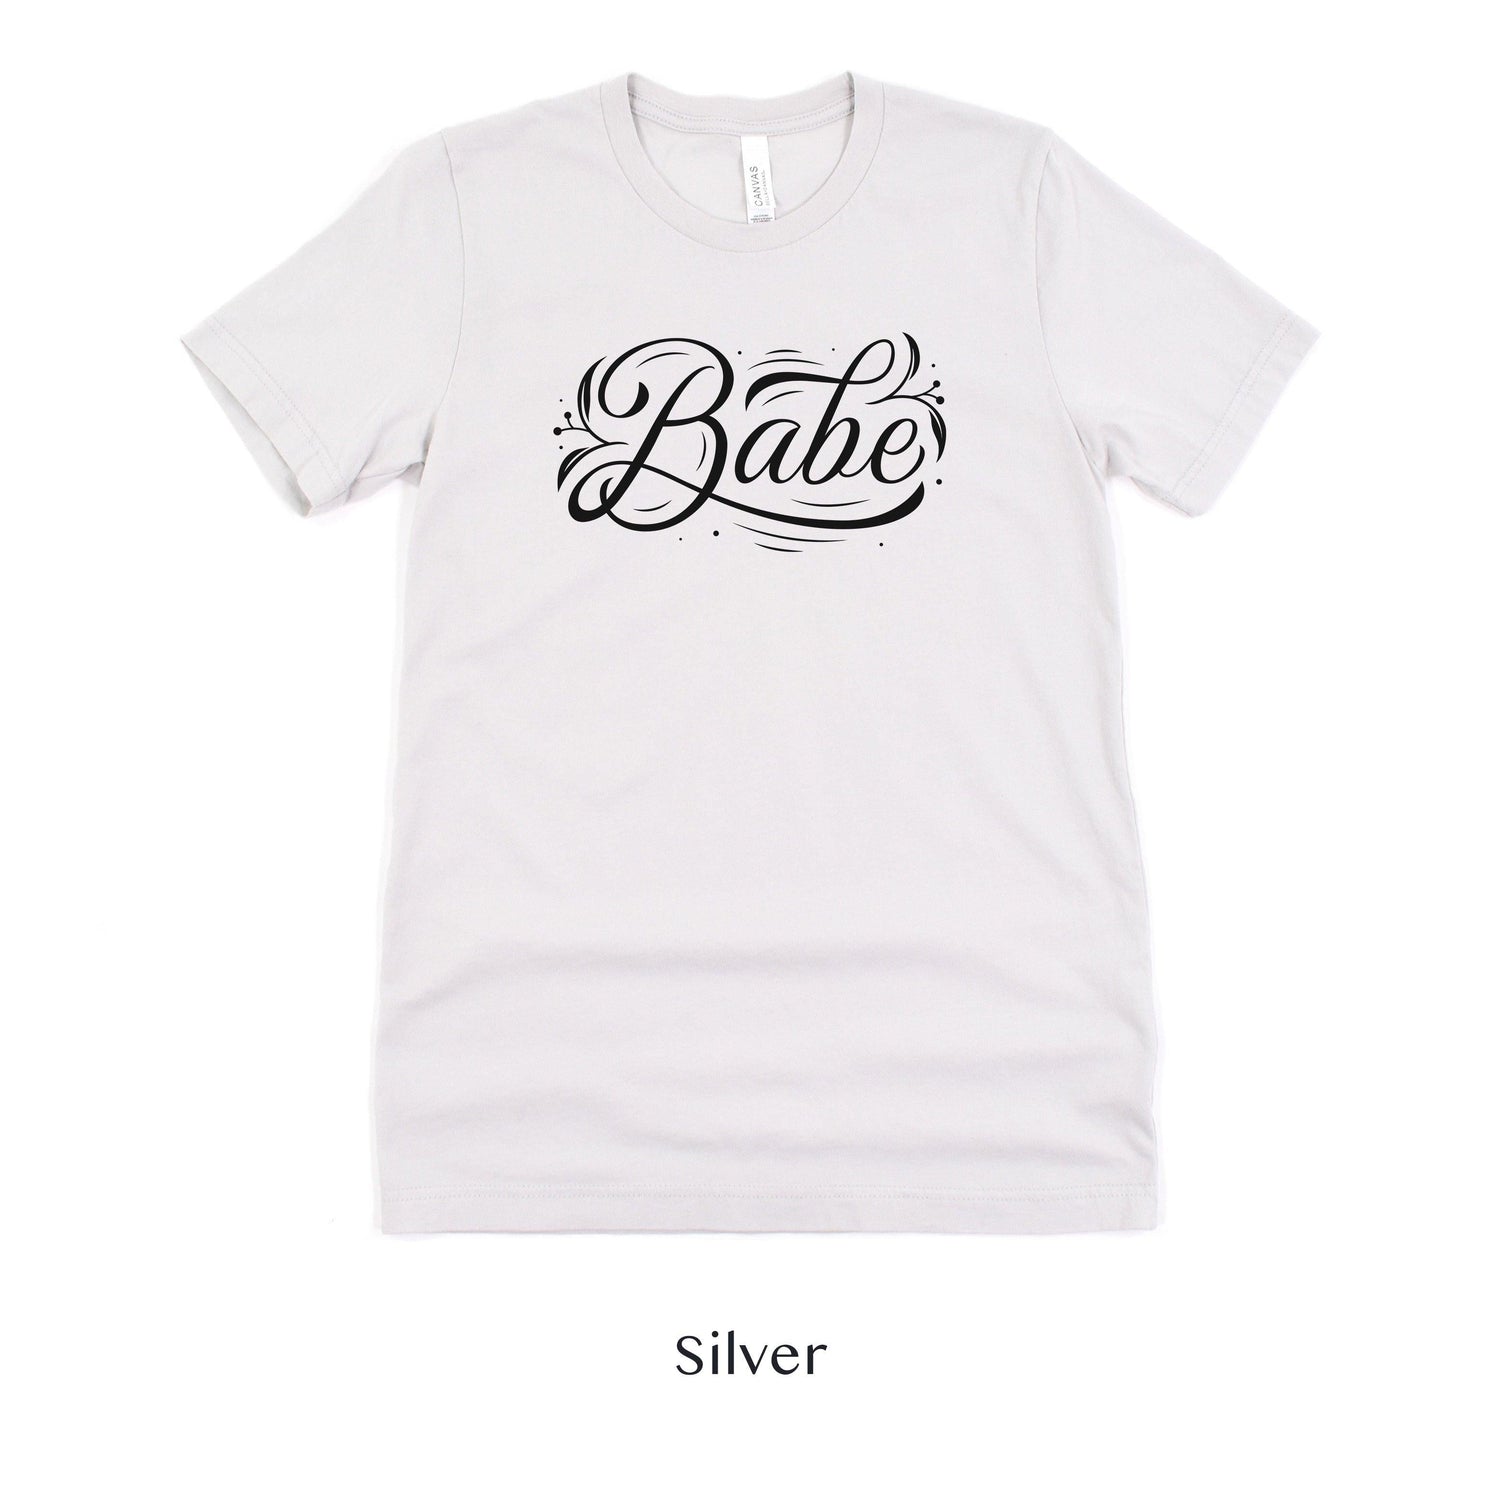 Babe Short-Sleeve Tee - Bach Weekend and Bridal Proposal Box Shirt - Plus Sizes Available! by Oaklynn Lane - silver tshirt